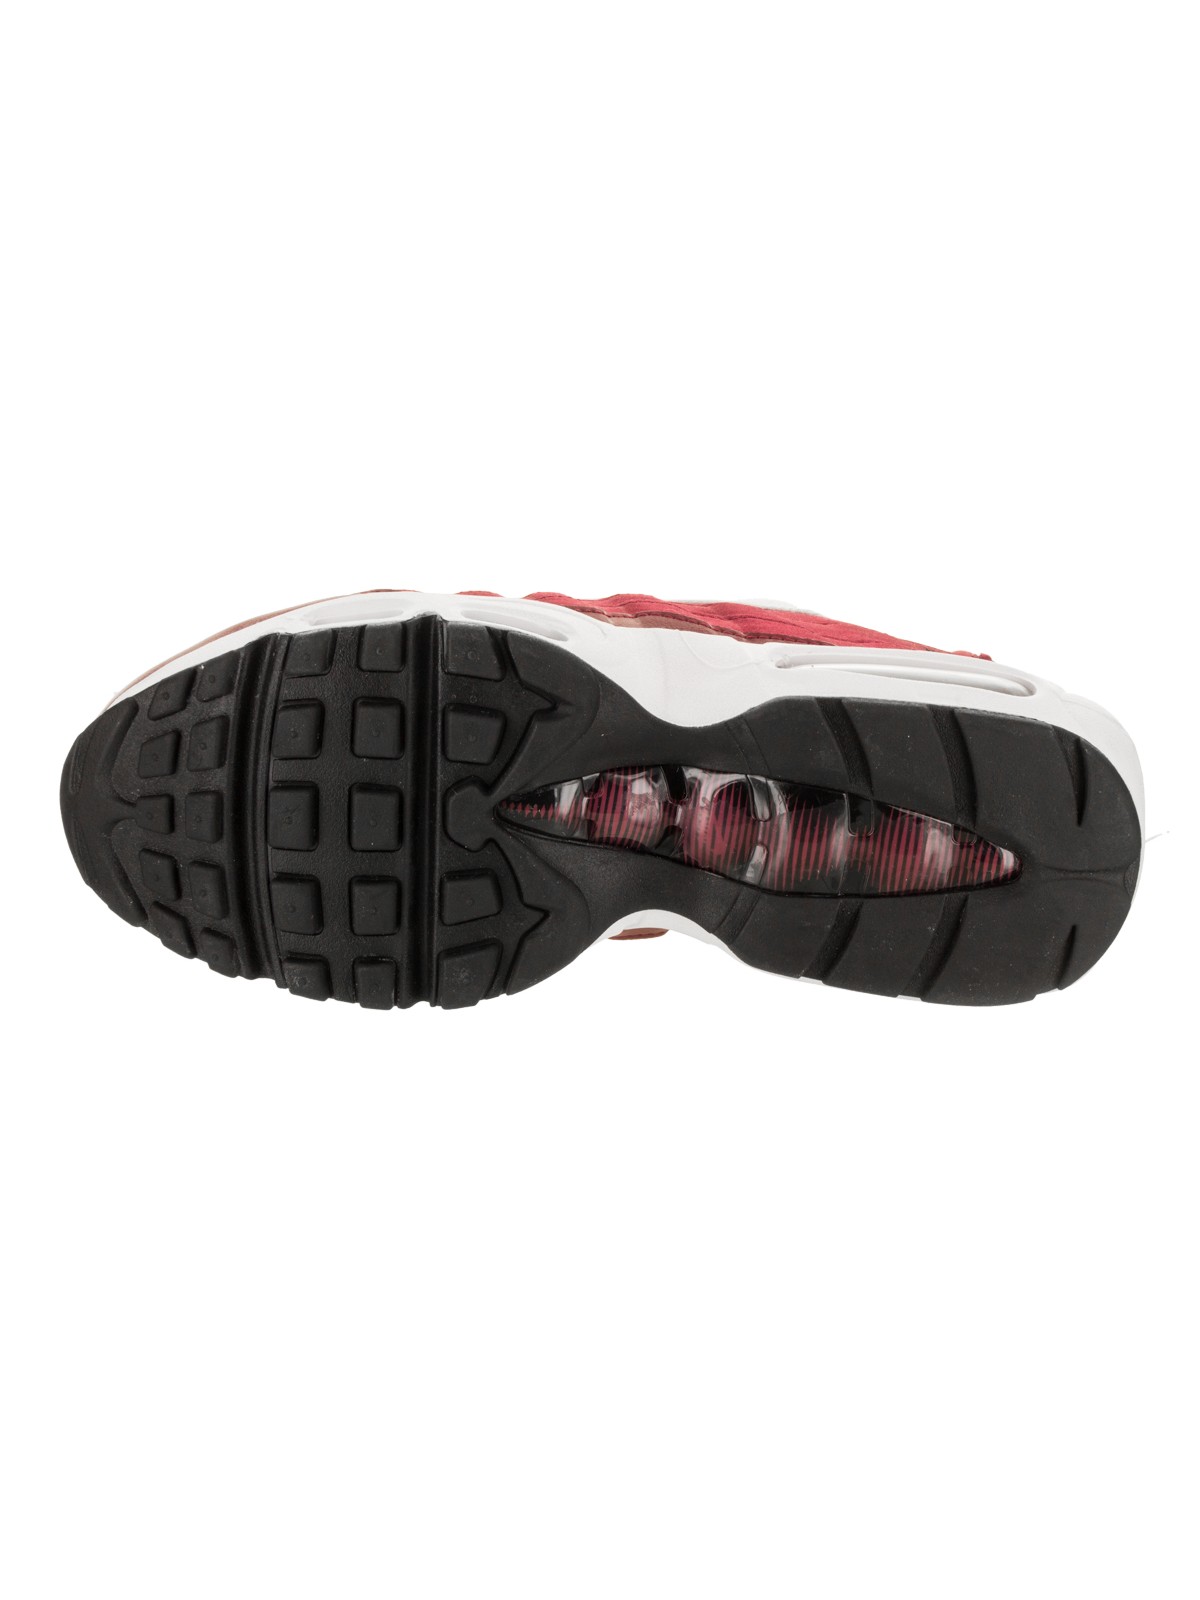 Nike Women's Air Max 95 LX Casual Shoe - image 5 of 5